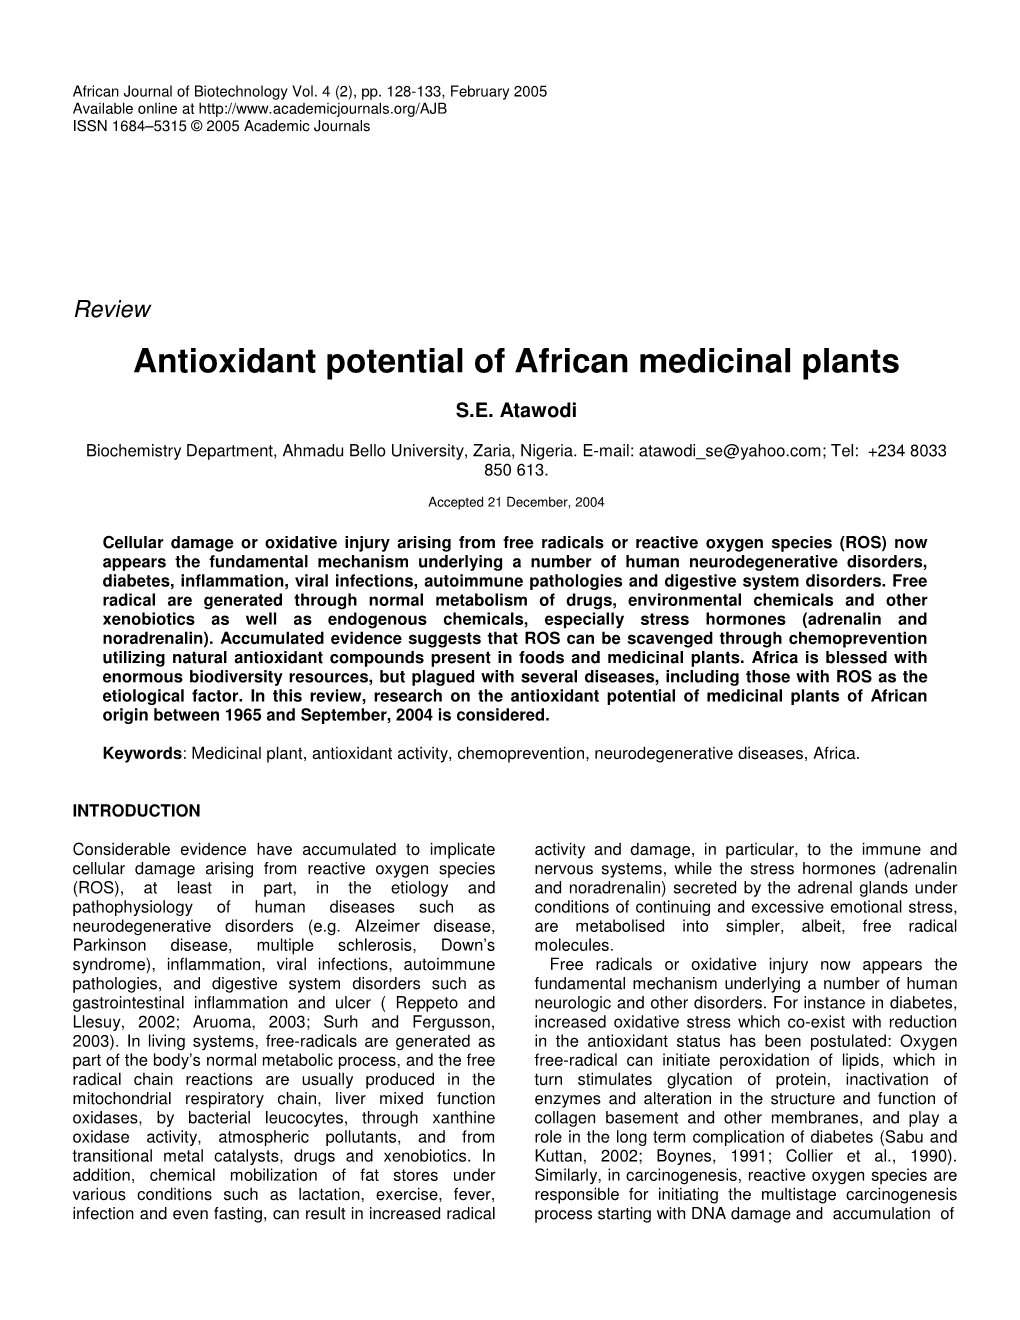 Antioxidant Potential of African Medicinal Plants